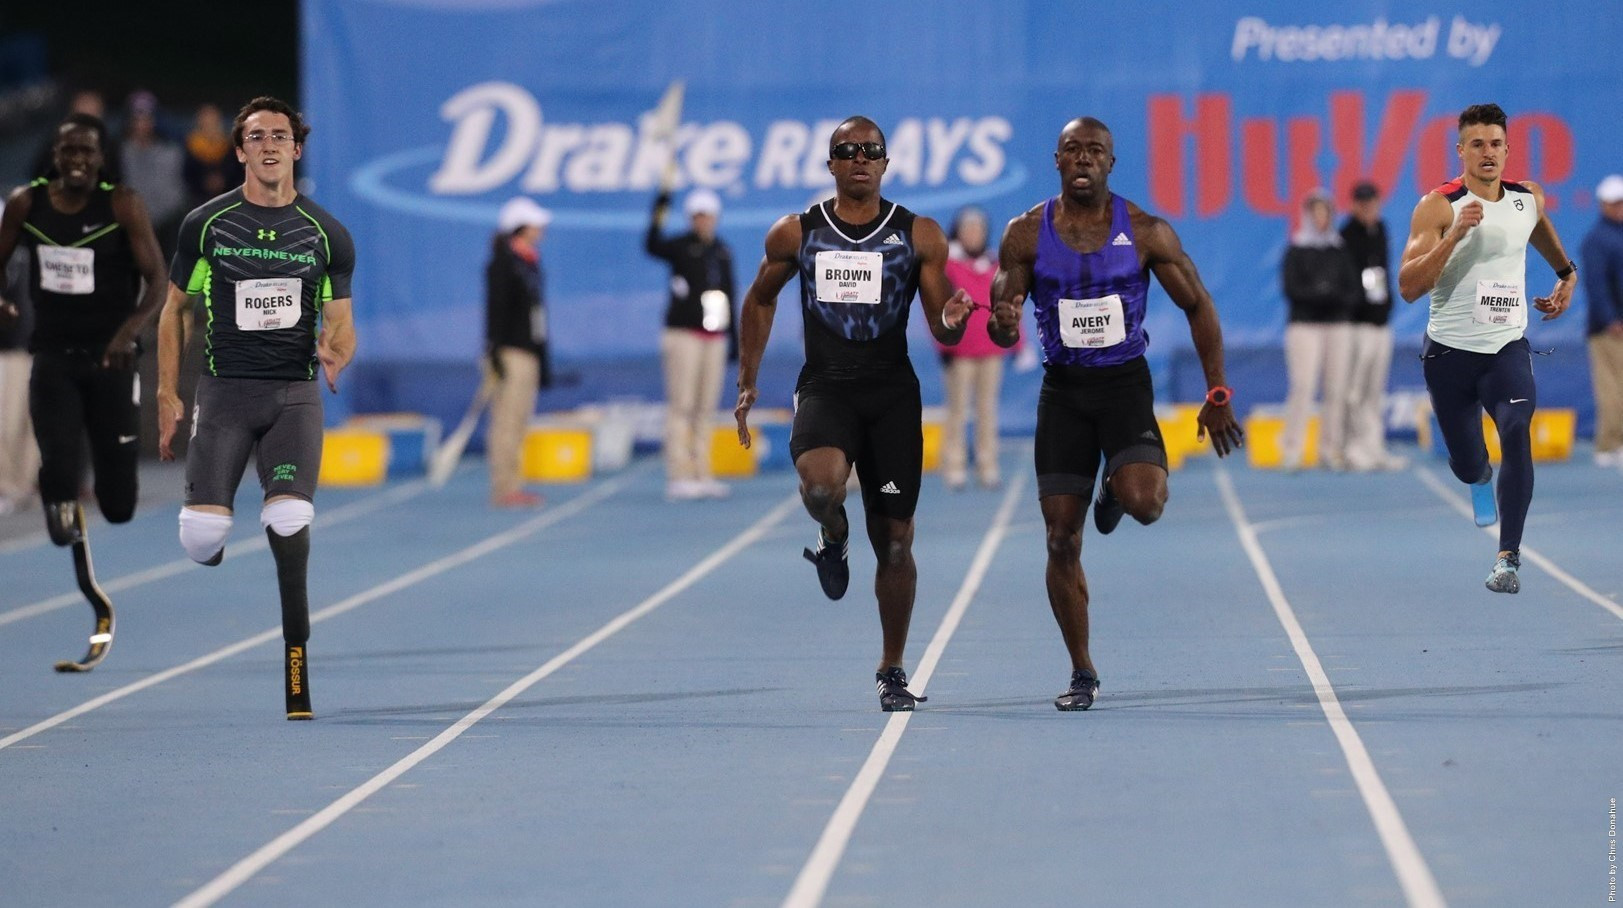 Paralympic gold medallist David Brown and guide Jerome Avery will be among the top US athletes taking part in the Drake Relays later this month ©Drake Relays